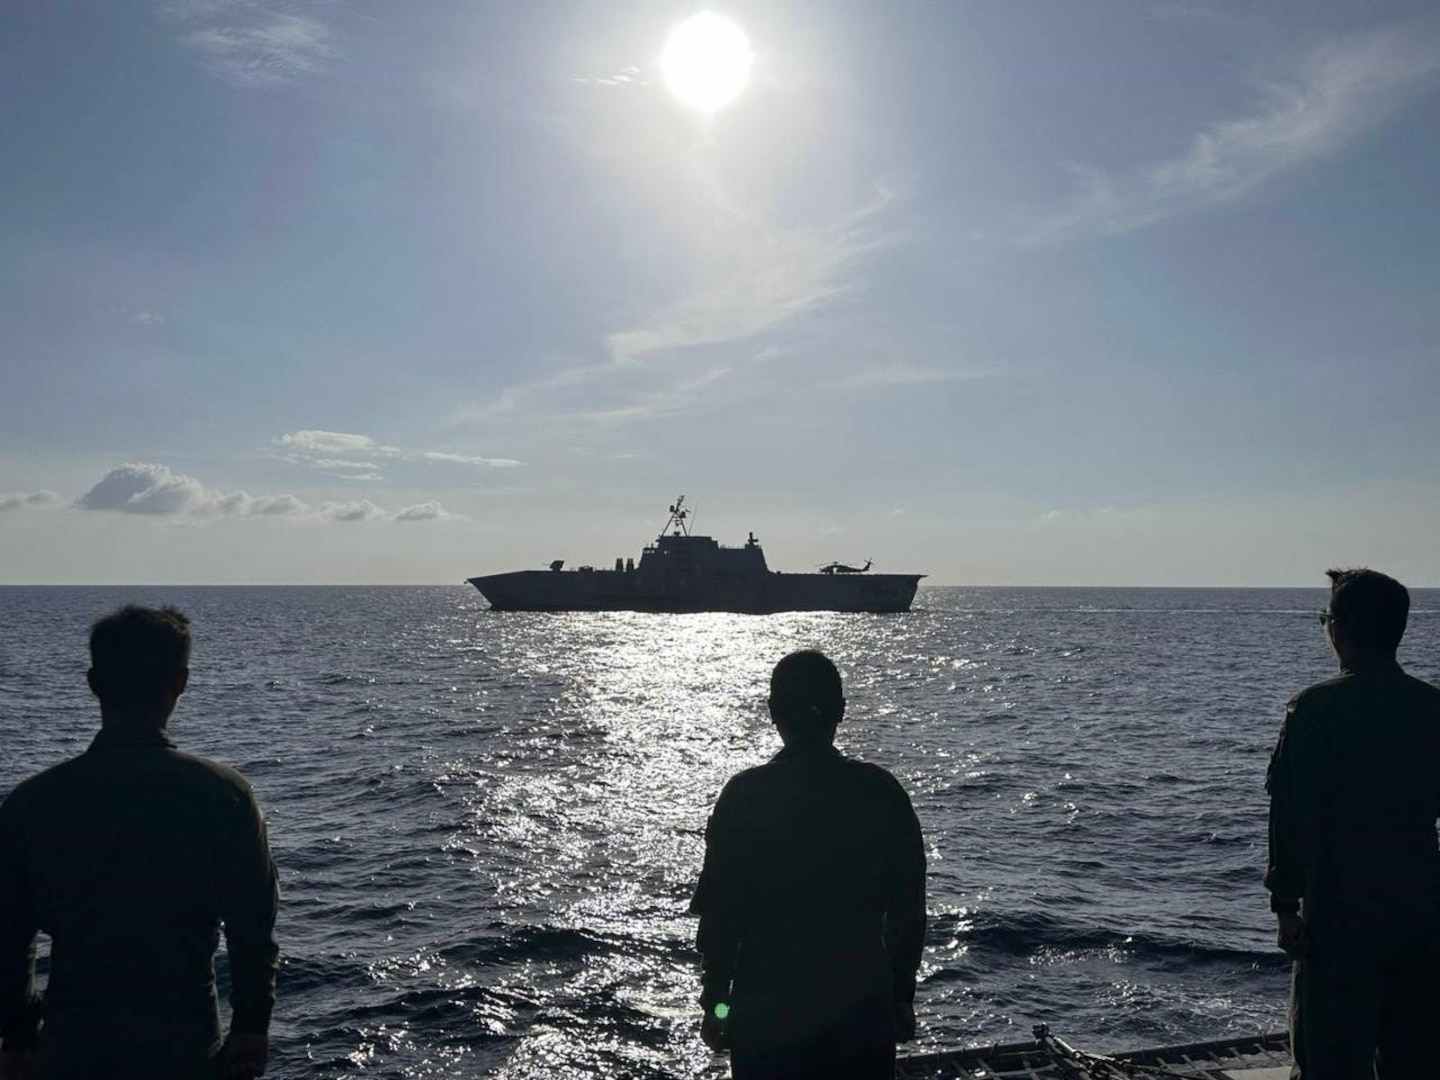 Armed Forces of the Philippines Sailors assigned to Philippine Navy’s BRP Gregorio Del Pilar (PS-15) look on as Independence-variant littoral combat ship USS Gabrielle Giffords (LCS 10) sails alongside during a maritime cooperate activity exercise in the South China Sea Feb. 9.